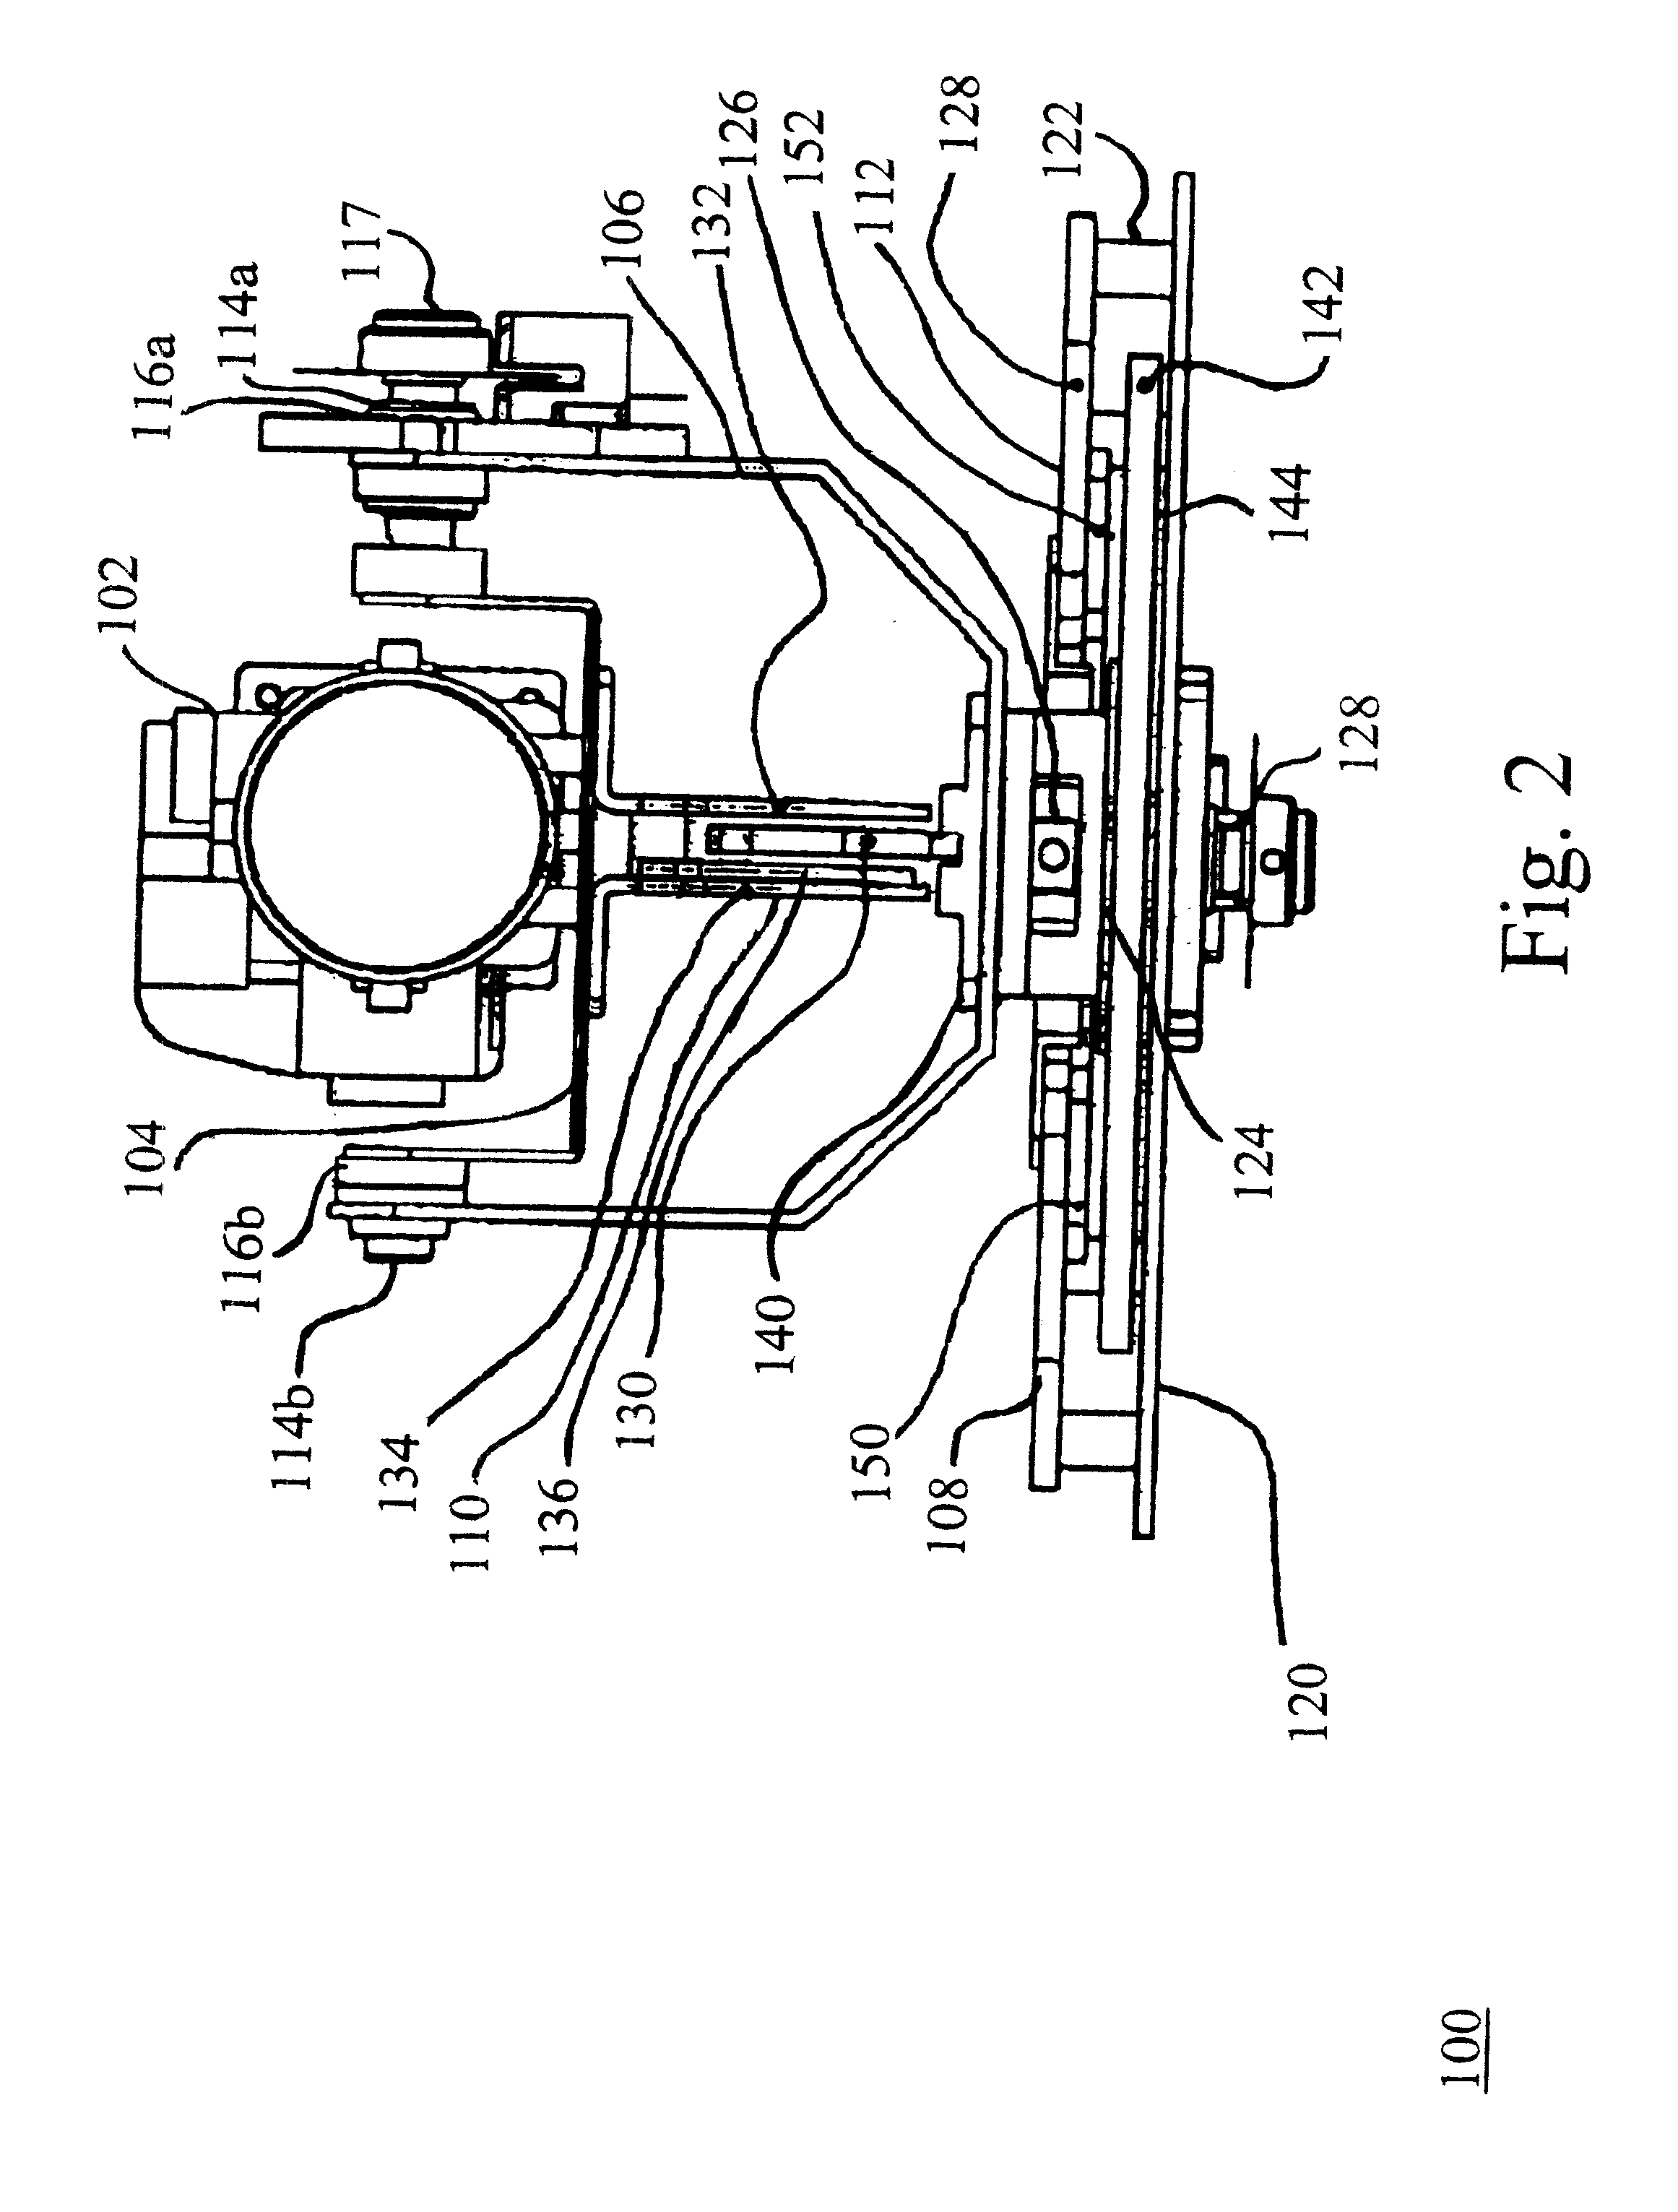 Device for rotatably positioning a camera or similar article about two orthogonal axes